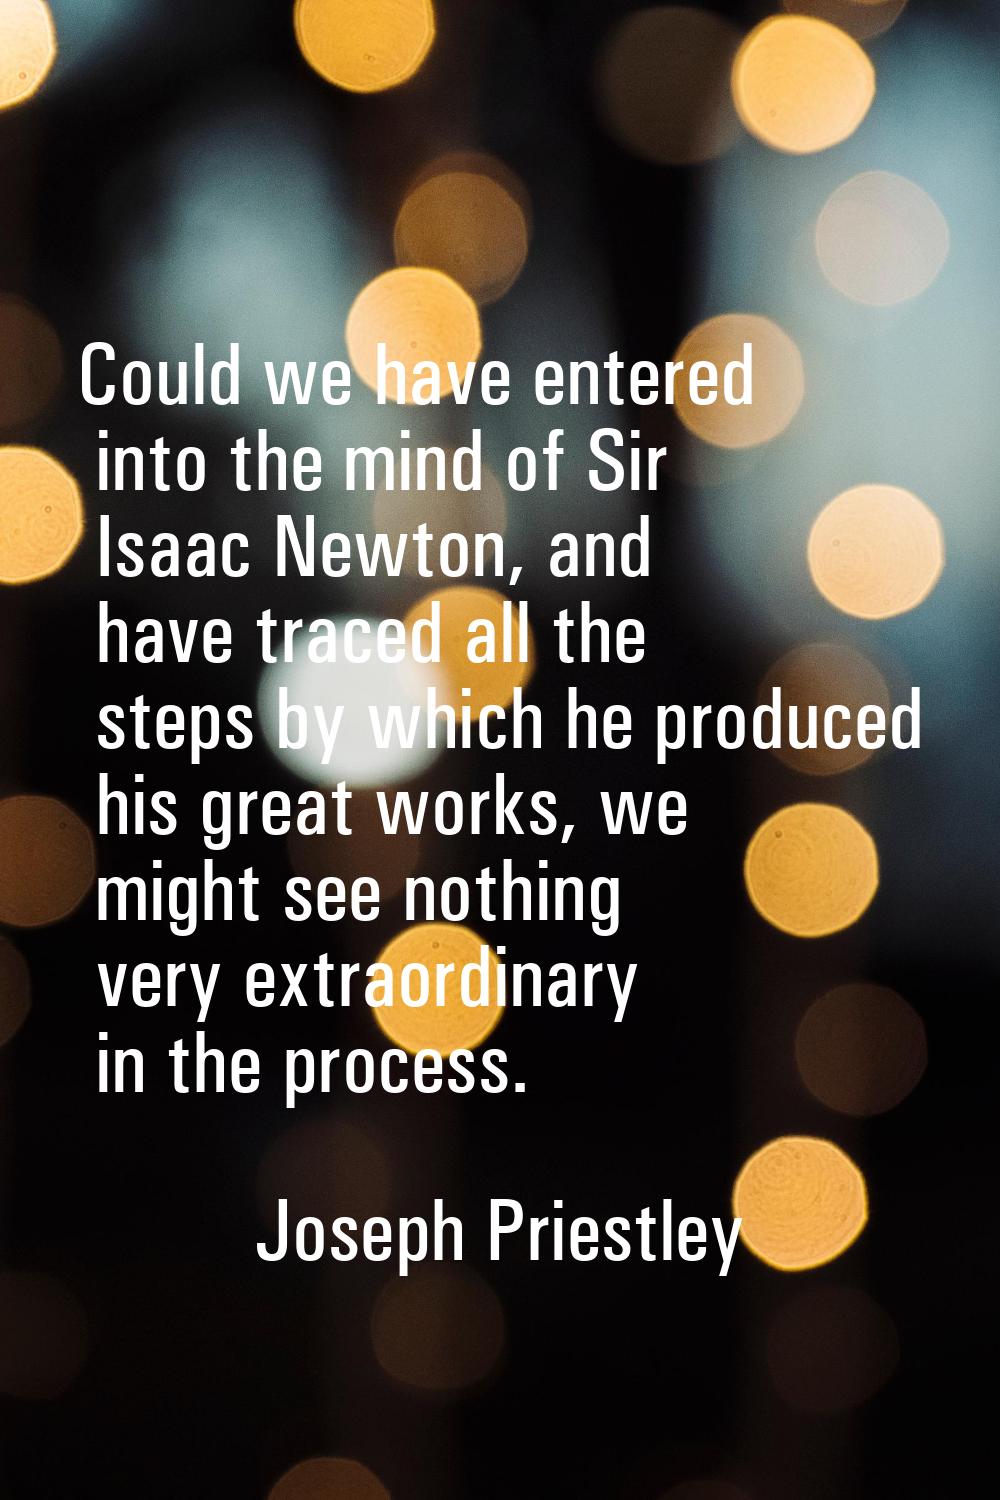 Could we have entered into the mind of Sir Isaac Newton, and have traced all the steps by which he 